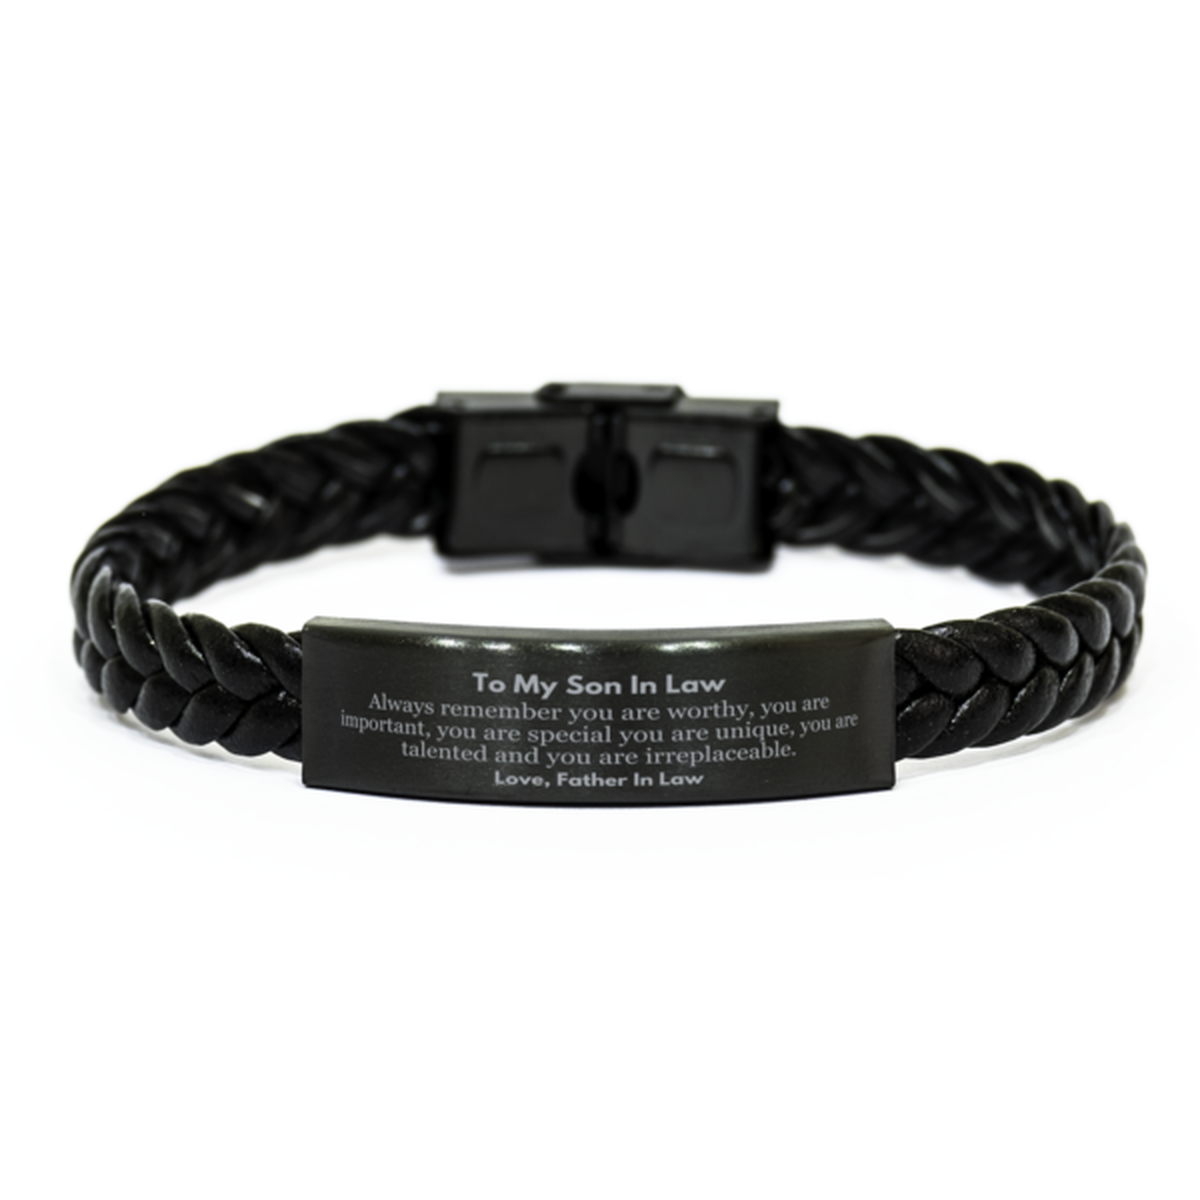 Son In Law Birthday Gifts from Father In Law, Inspirational Braided Leather Bracelet for Son In Law Christmas Graduation Gifts for Son In Law Always remember you are worthy, you are important. Love, Father In Law